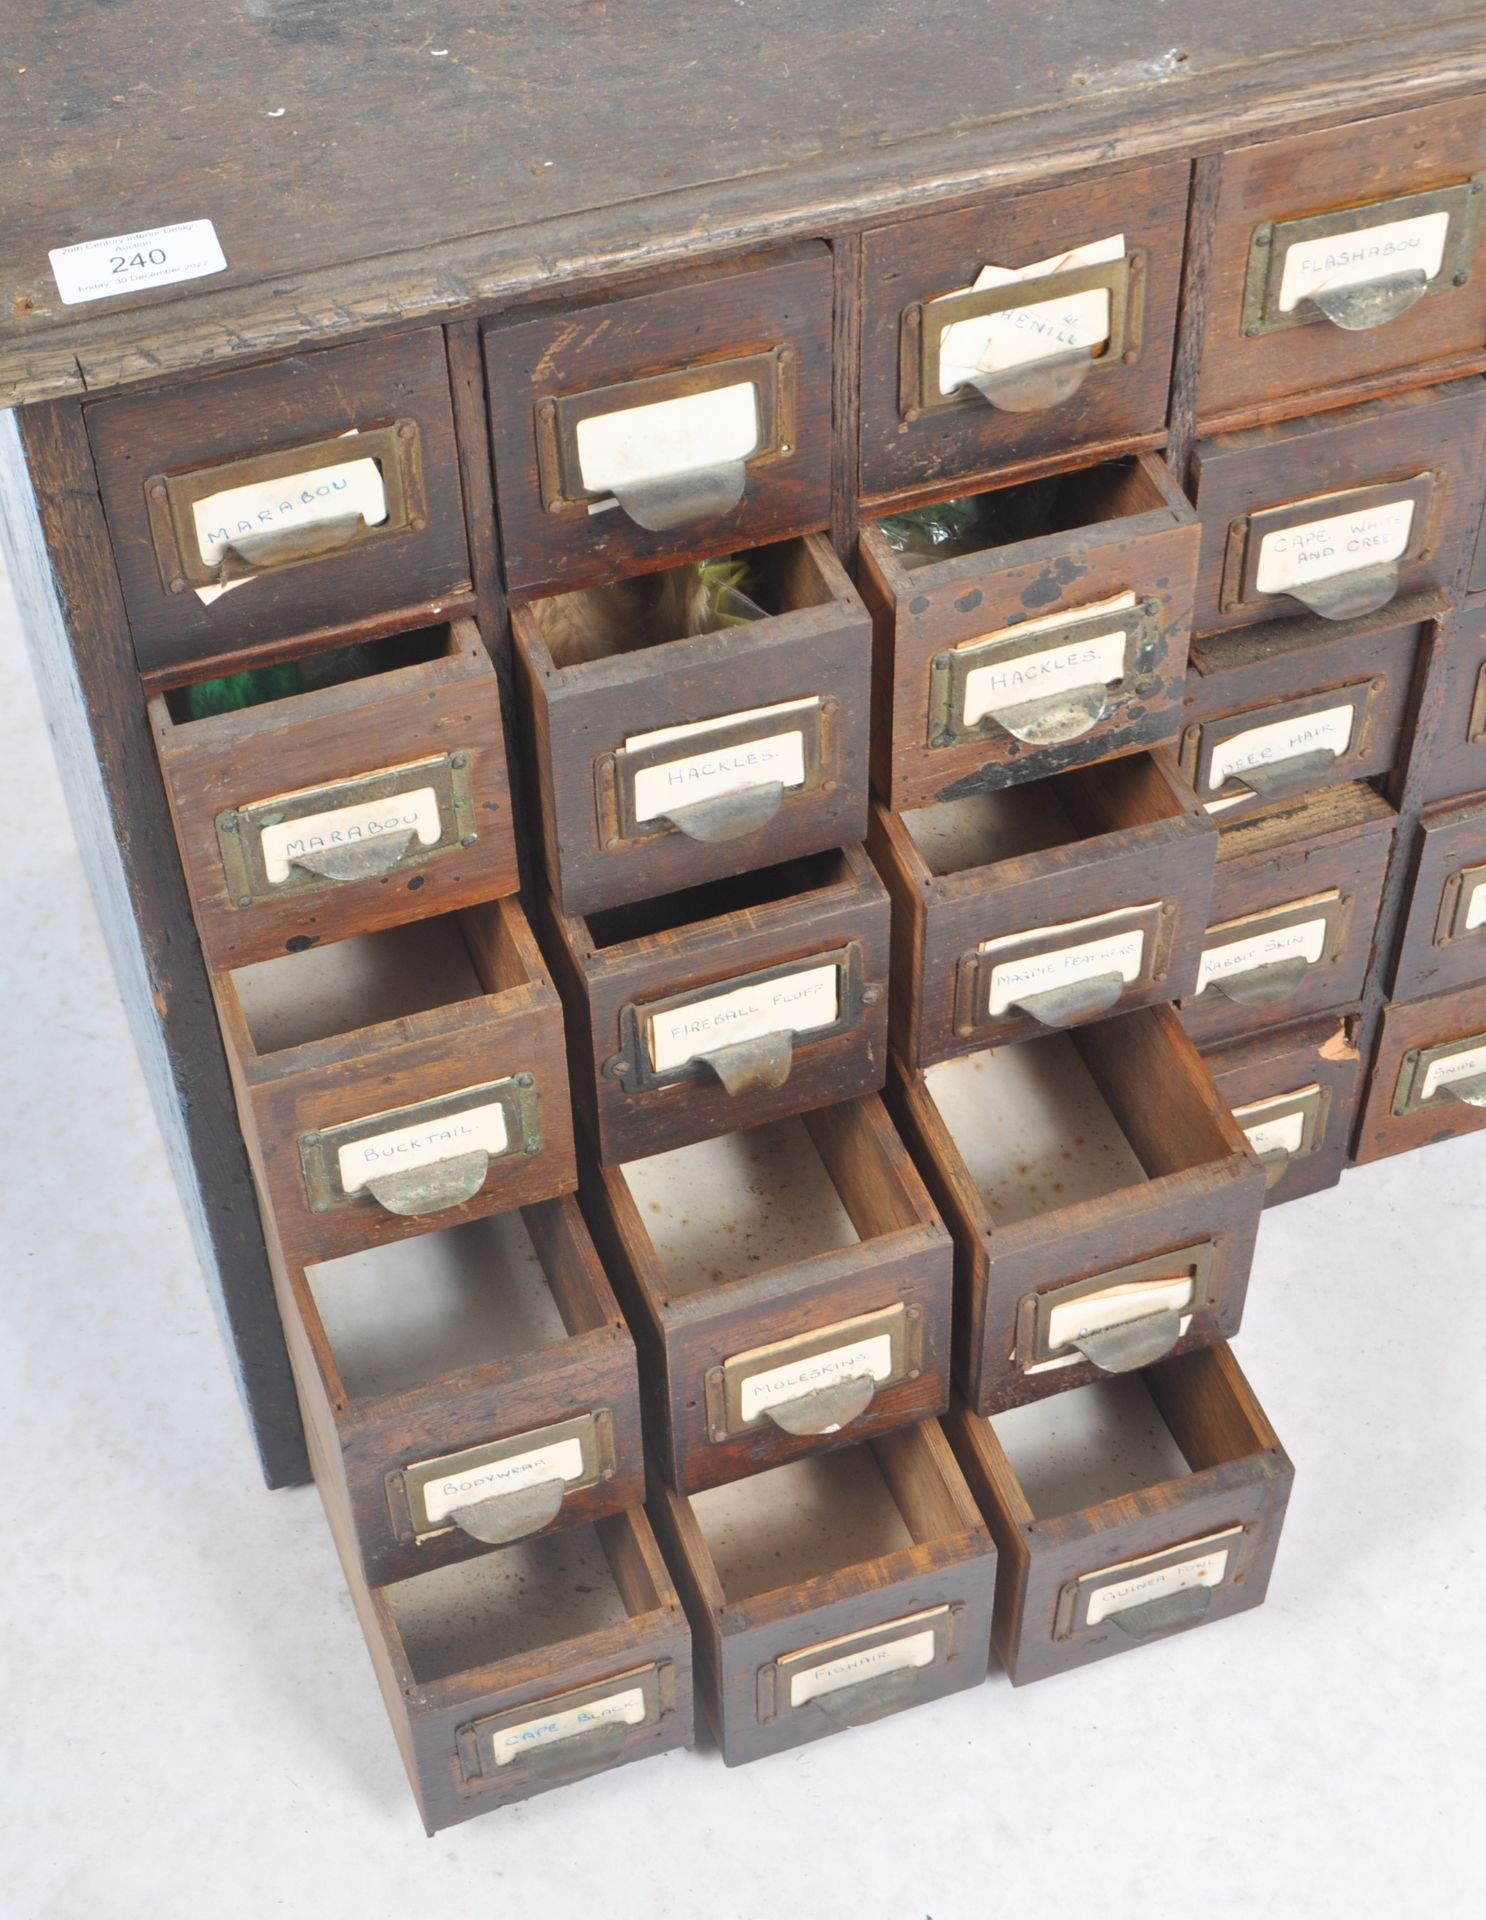 EARLY 20TH CENTURY MULTI DRAWER PIGEON HOLE CABINET - Image 4 of 6